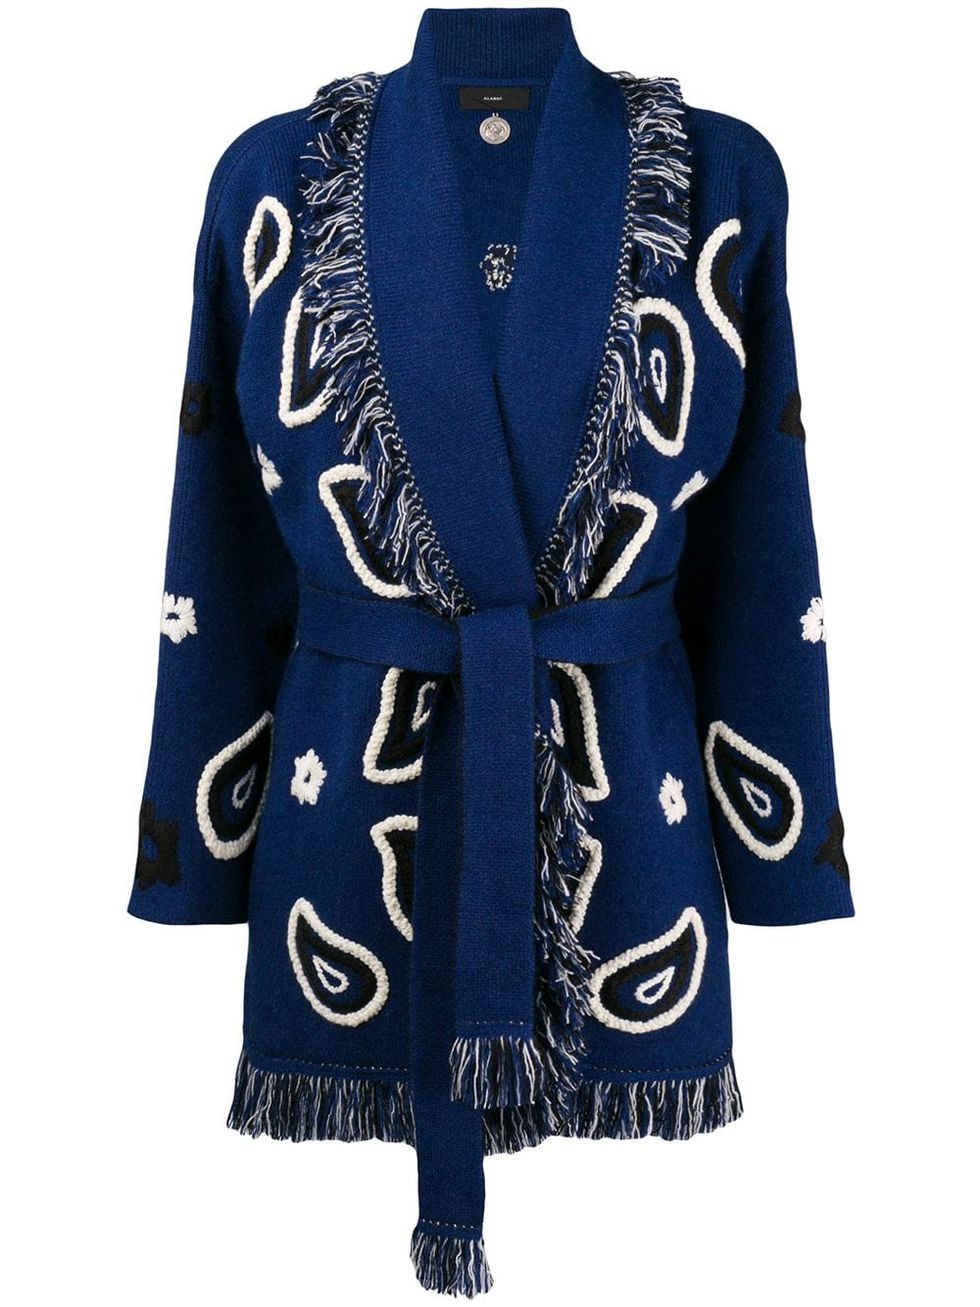 Clothing, Outerwear, Blue, Cobalt blue, Electric blue, Sleeve, Robe, Jacket, Top, Coat, 